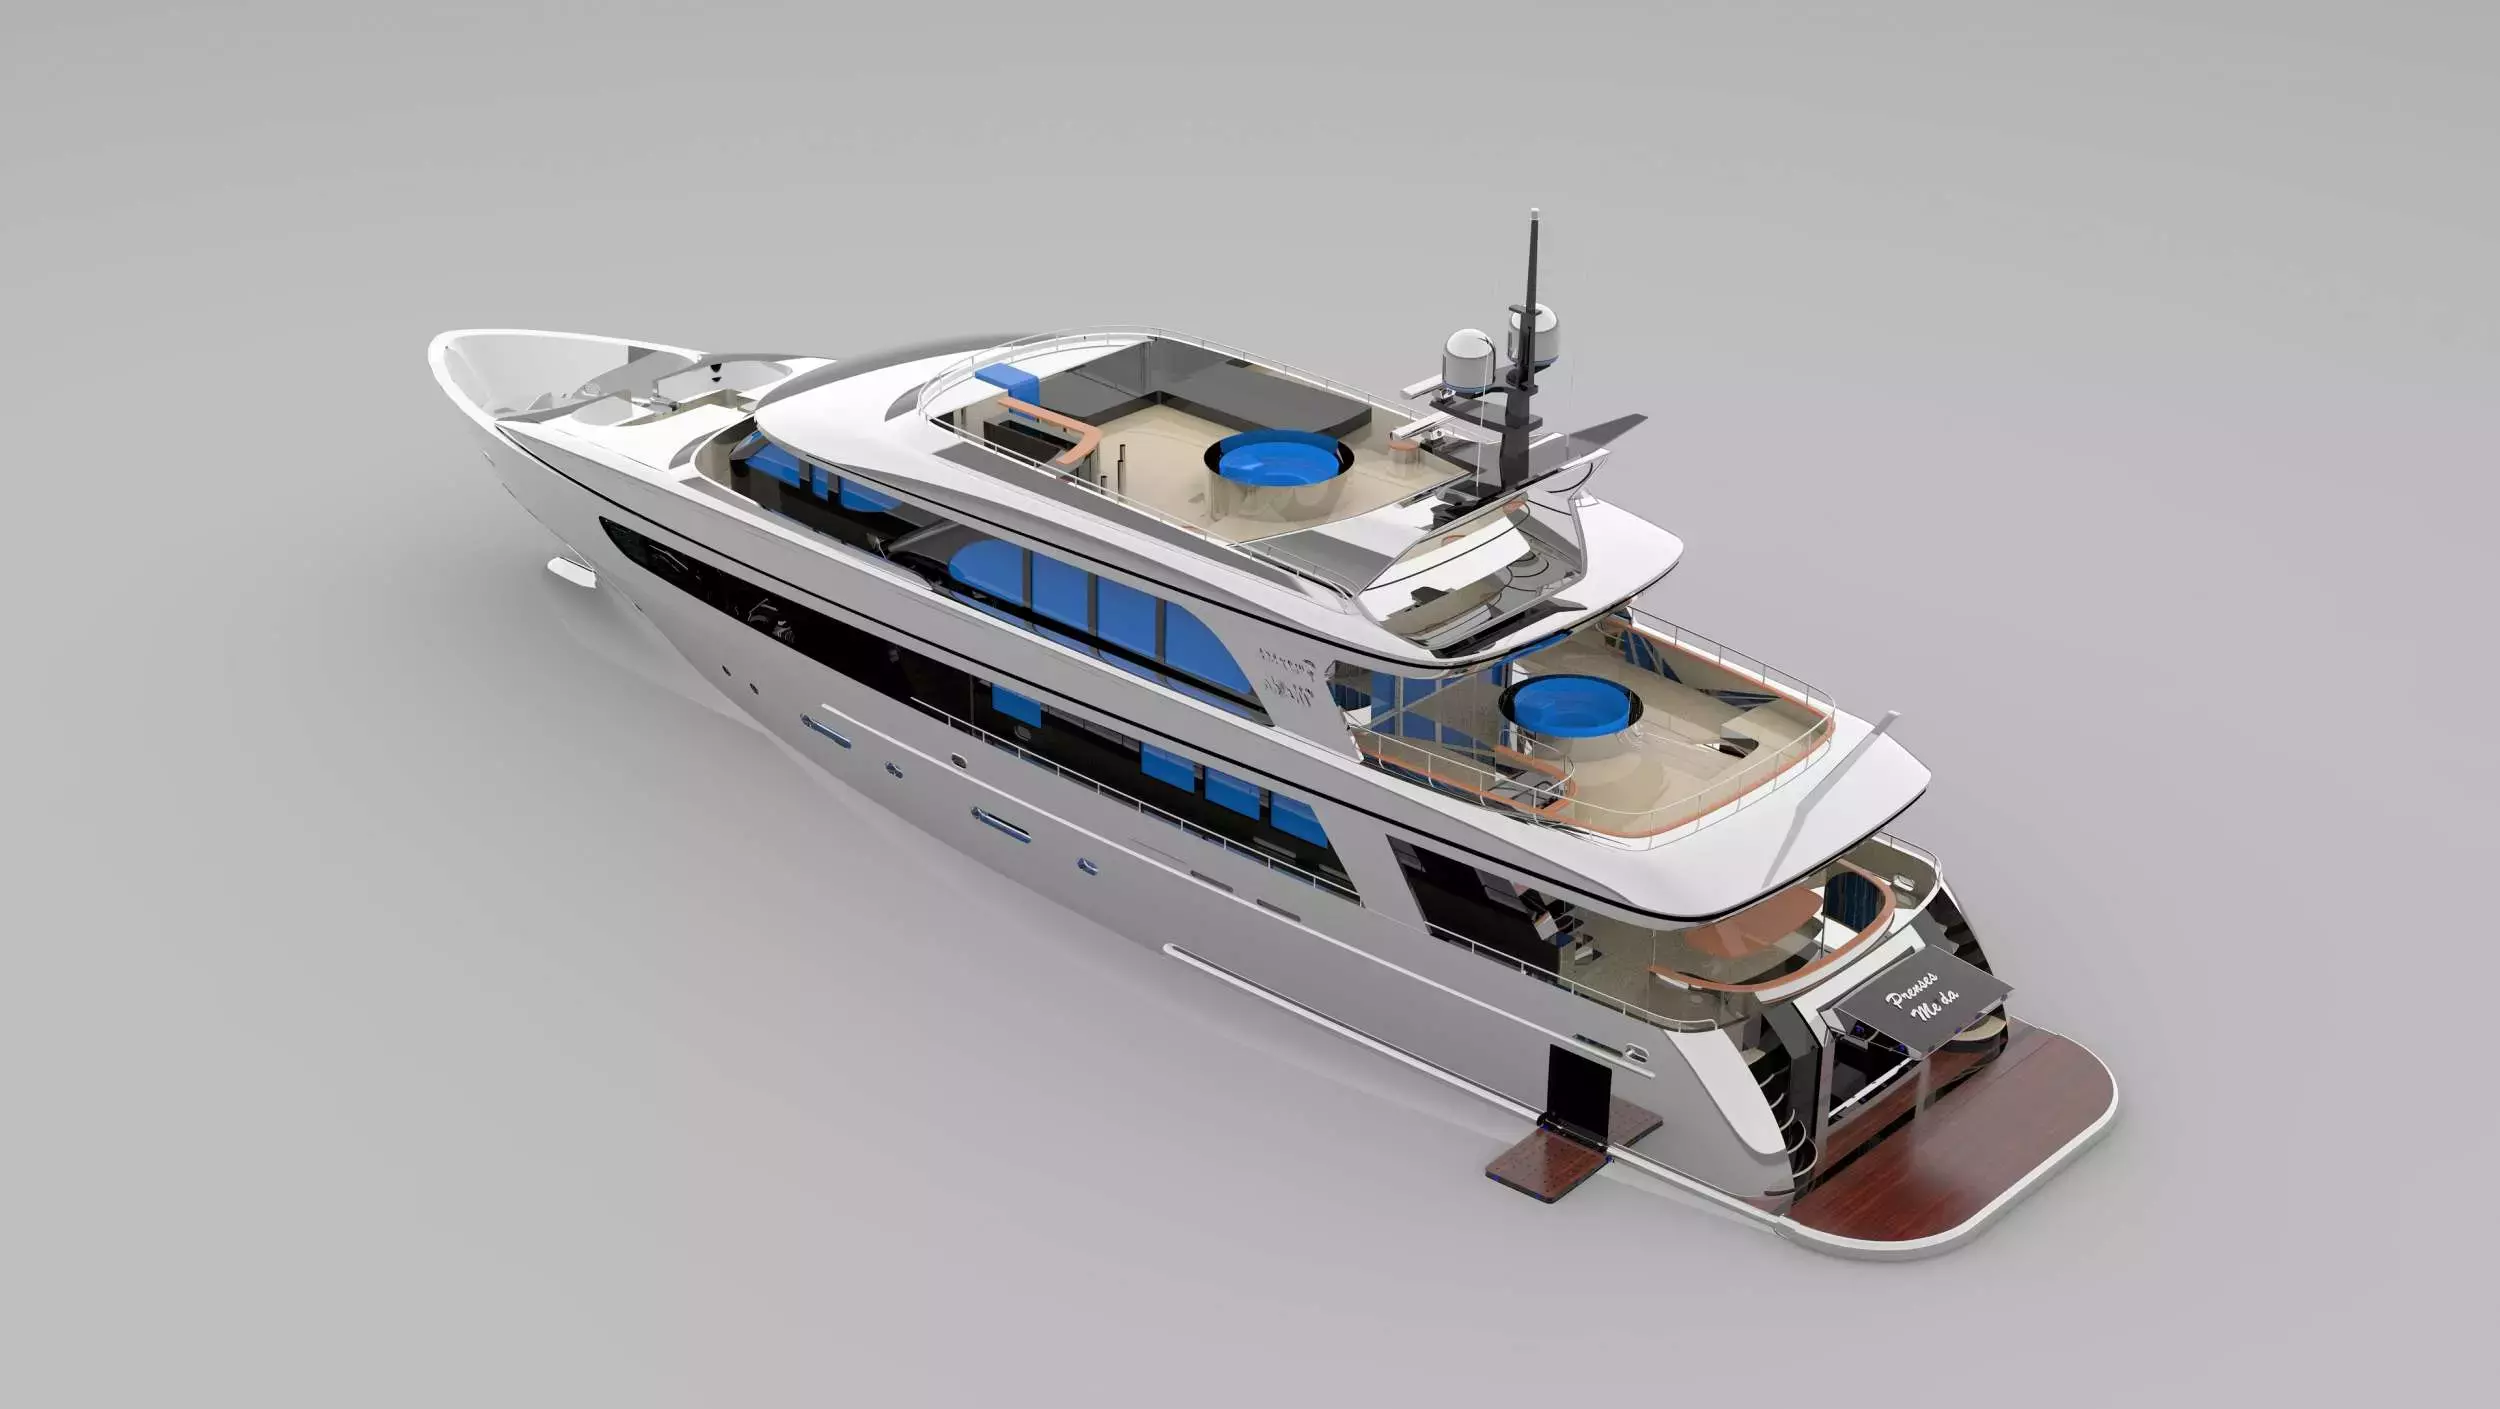 Princess Melda by Custom Made - Top rates for a Charter of a private Motor Yacht in Turkey